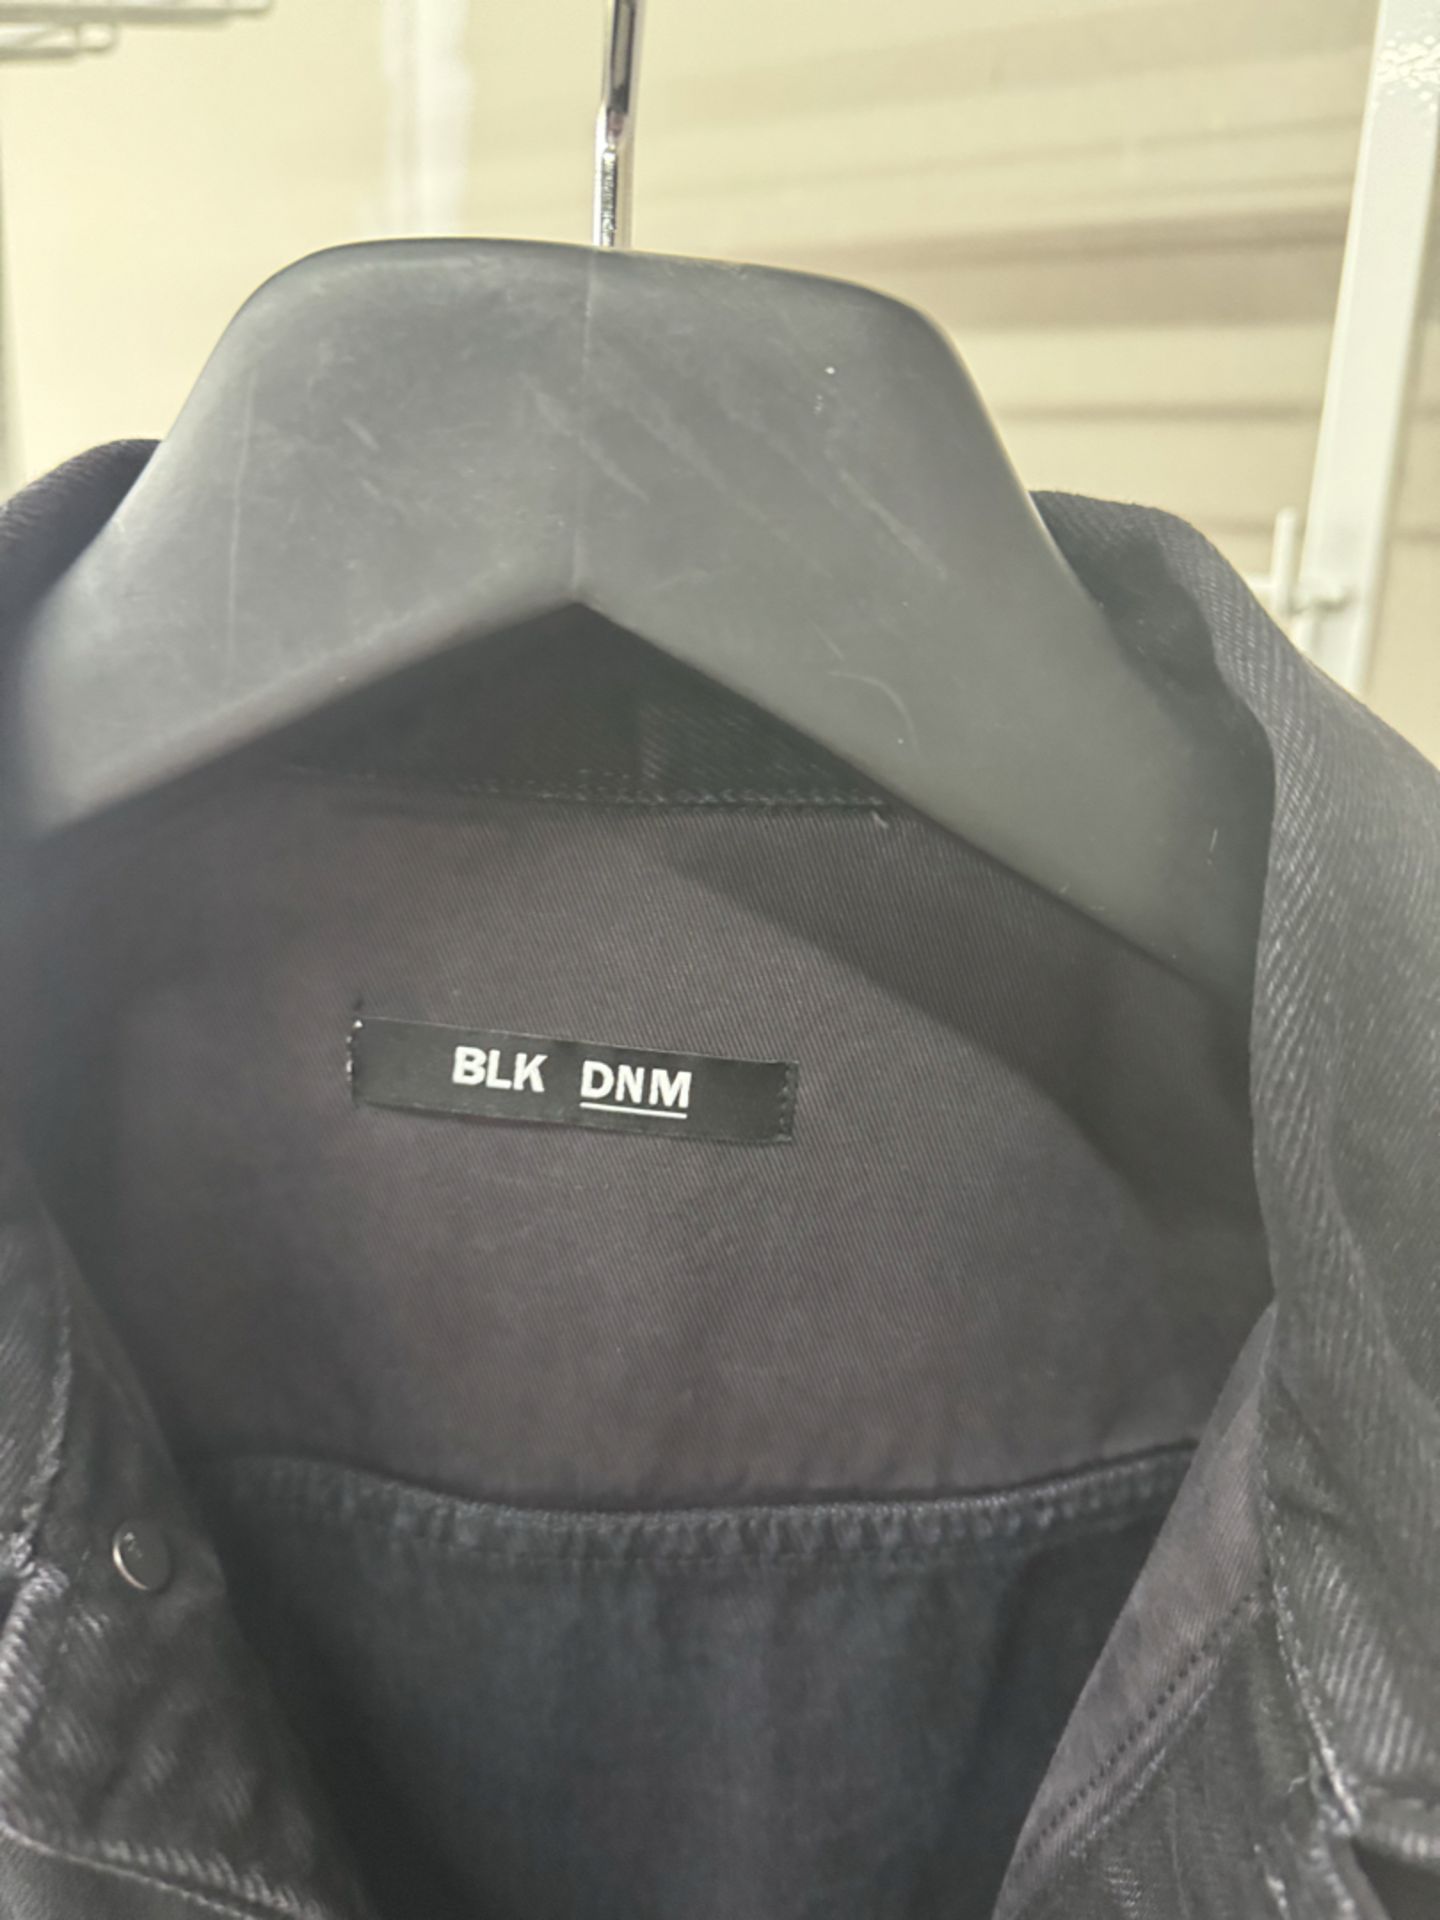 BLK DNM NYC Unisex Black Jacket - New with Tags - Size Medium - RRP Â£150+ - NO VAT! - Image 4 of 6